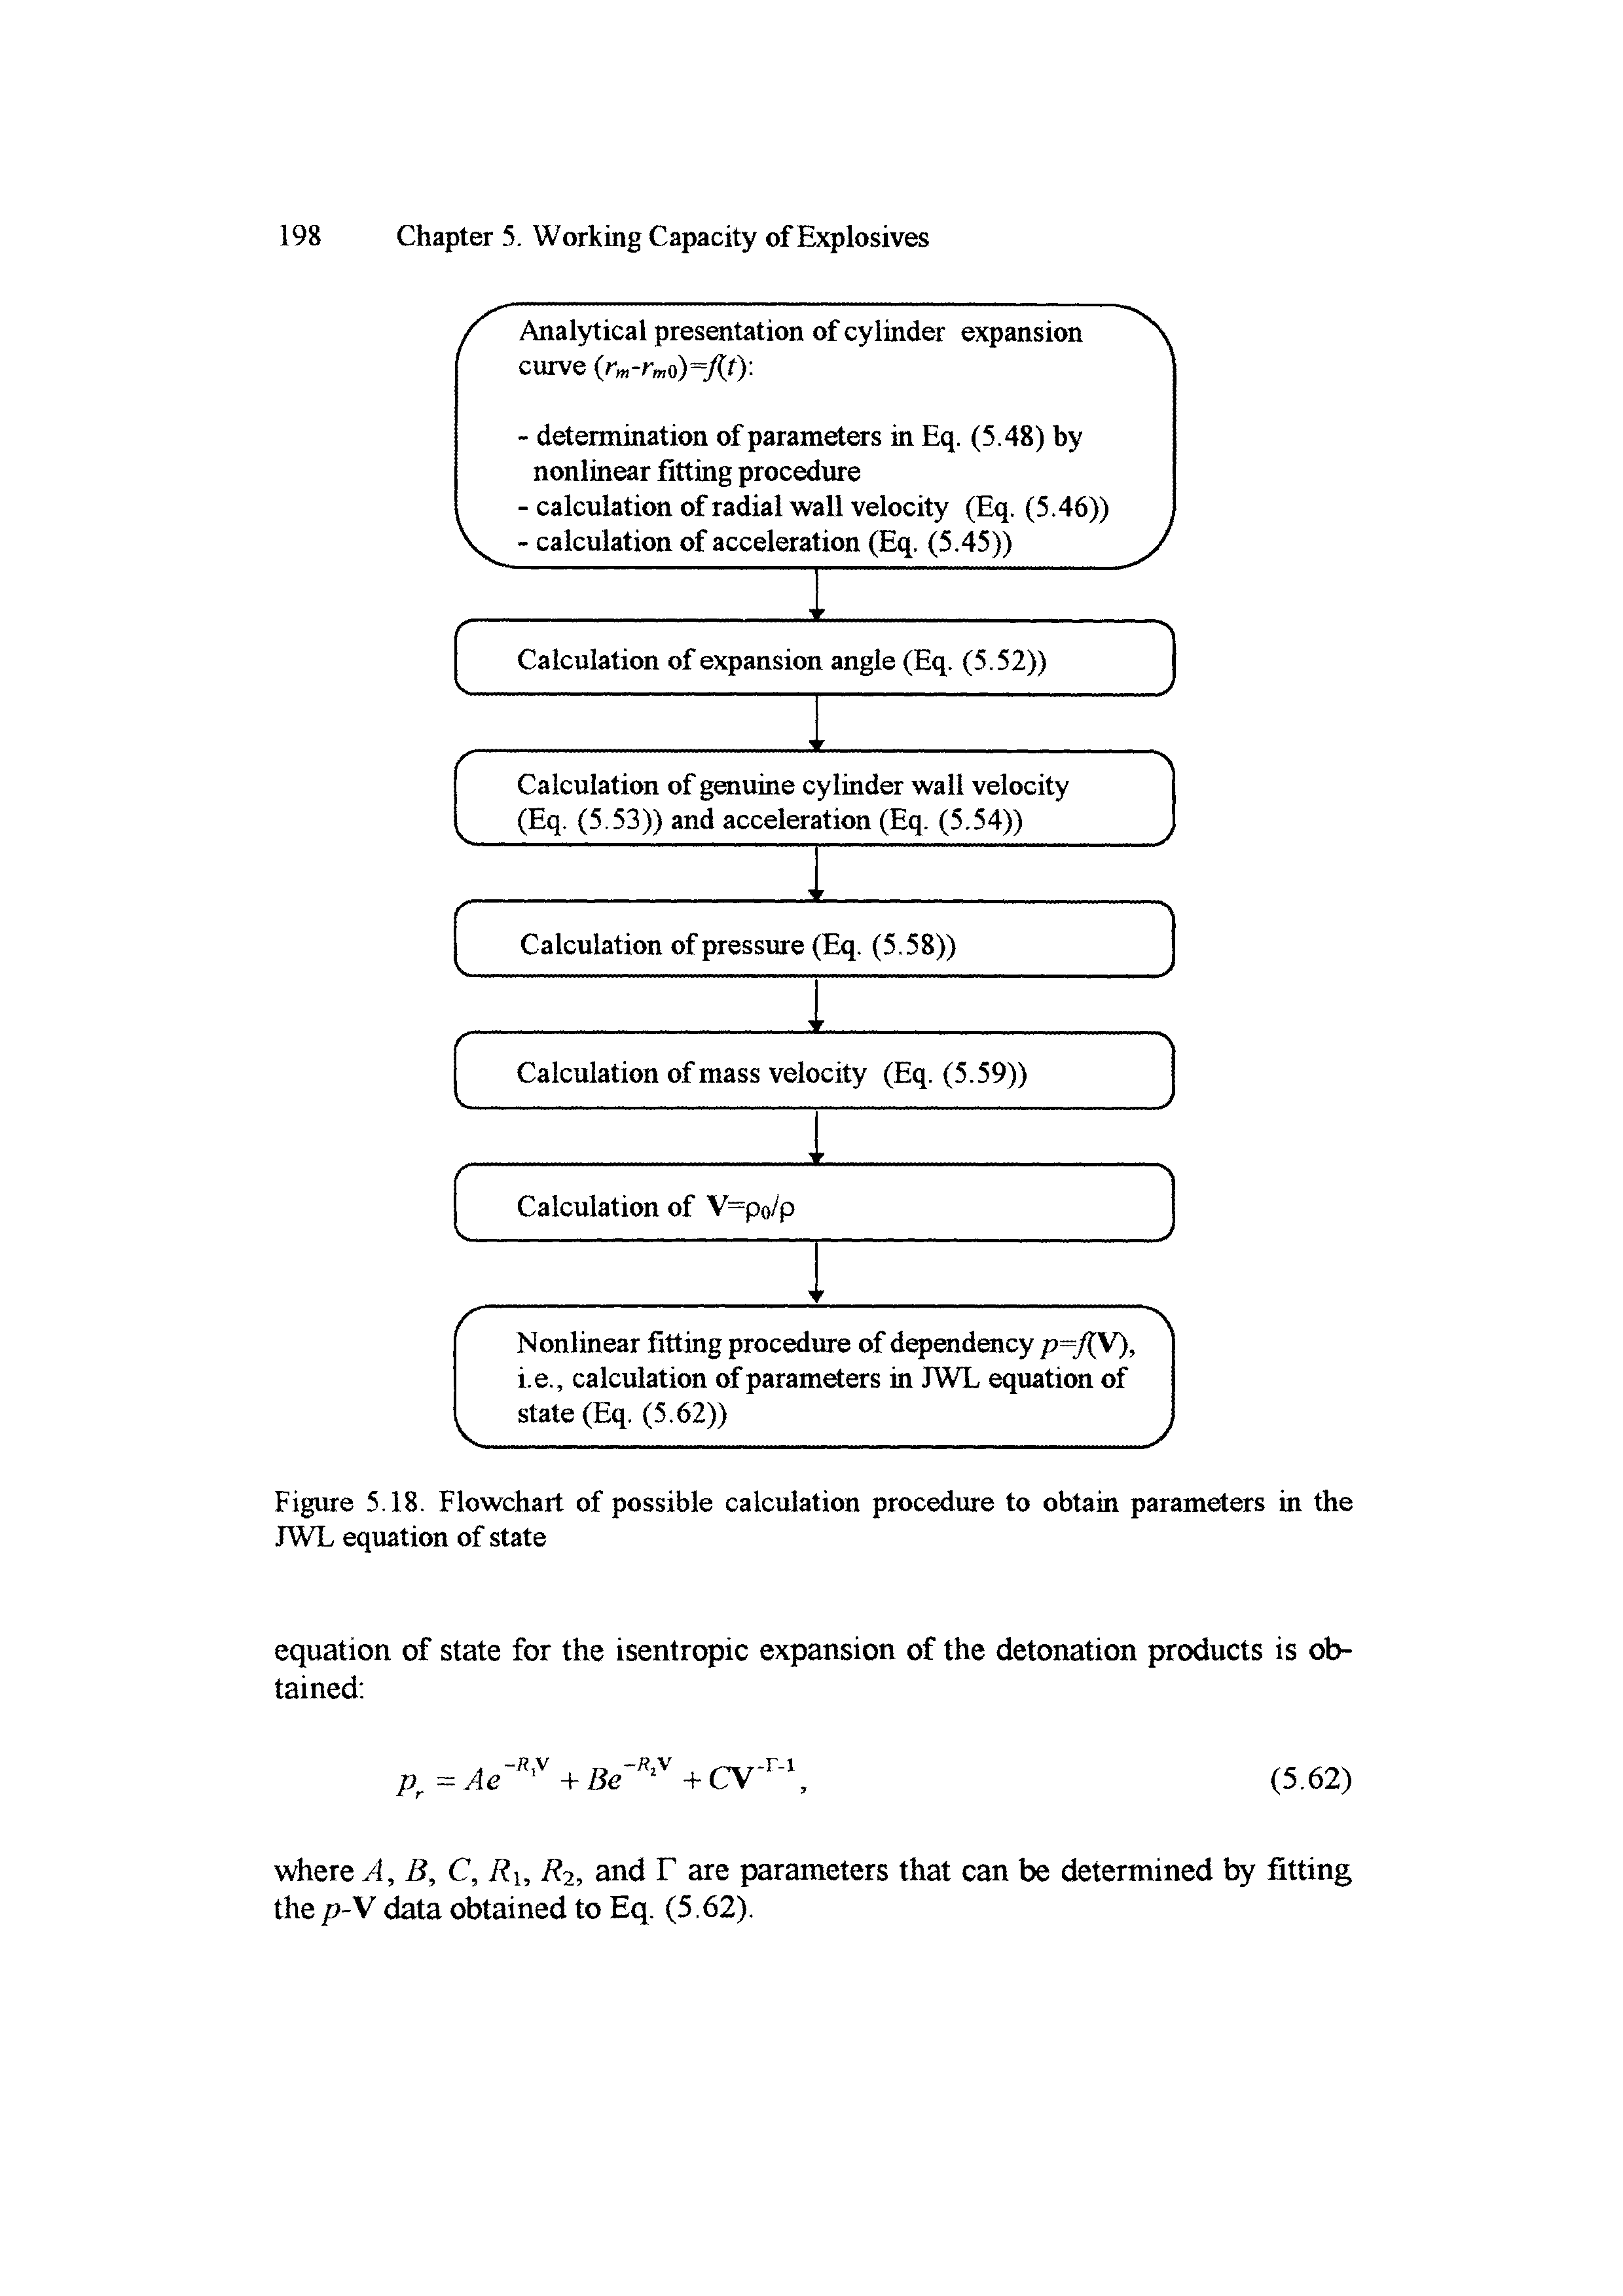 Figure 5.18. Flowchart of possible calculation procedure to obtain parameters in the JWL equation of state...